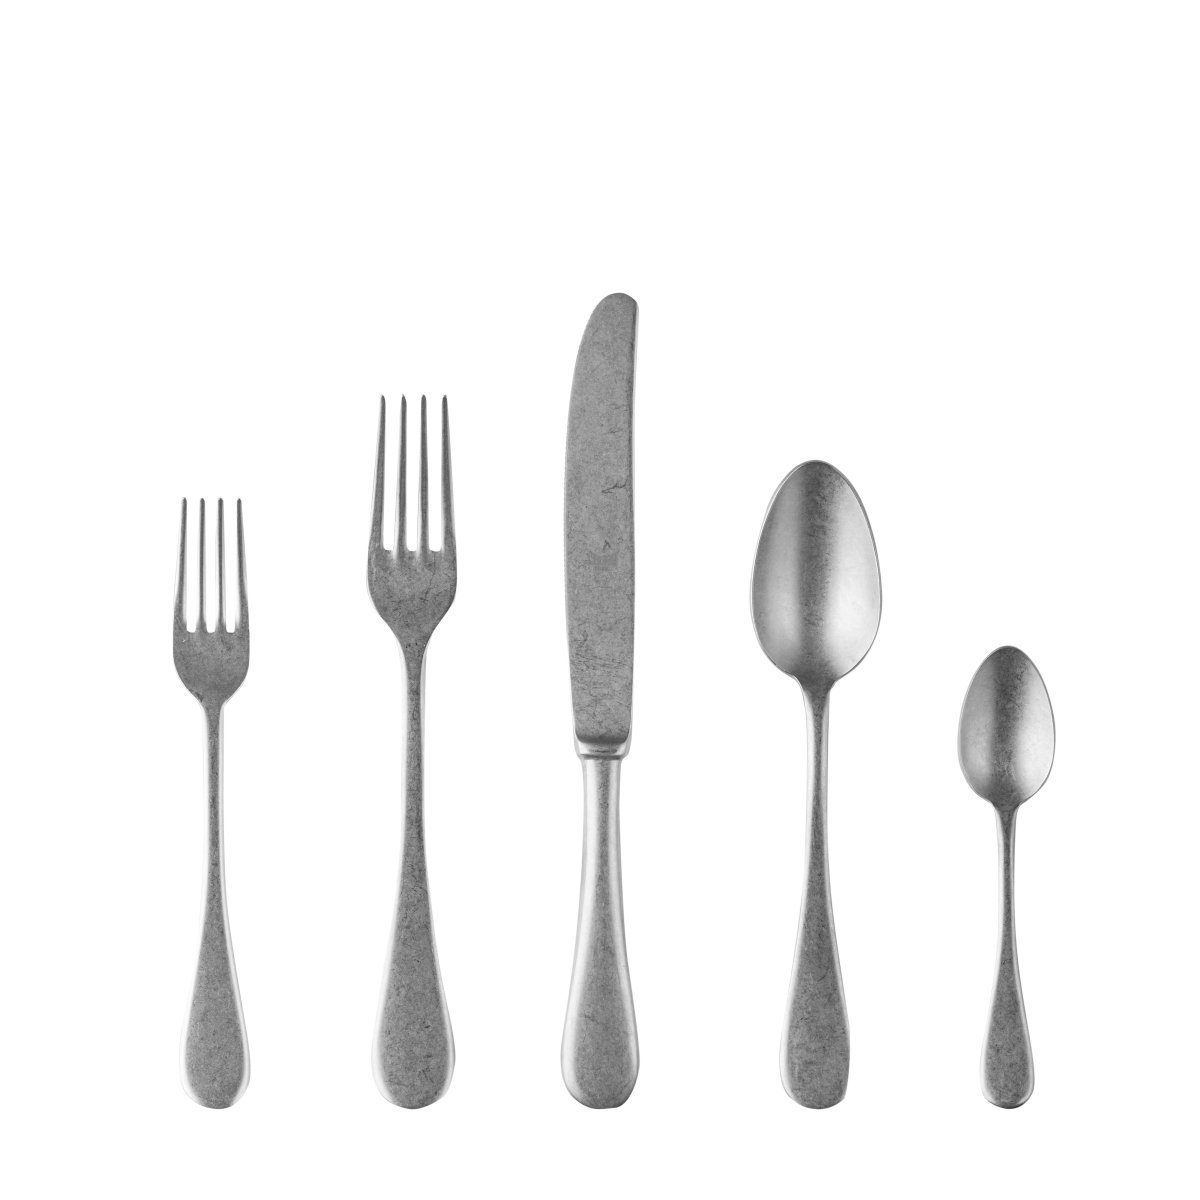 Mepra 1026VI22005 Stainless Steel Place Setting Vintage Flat Ware Set - 5 Piece